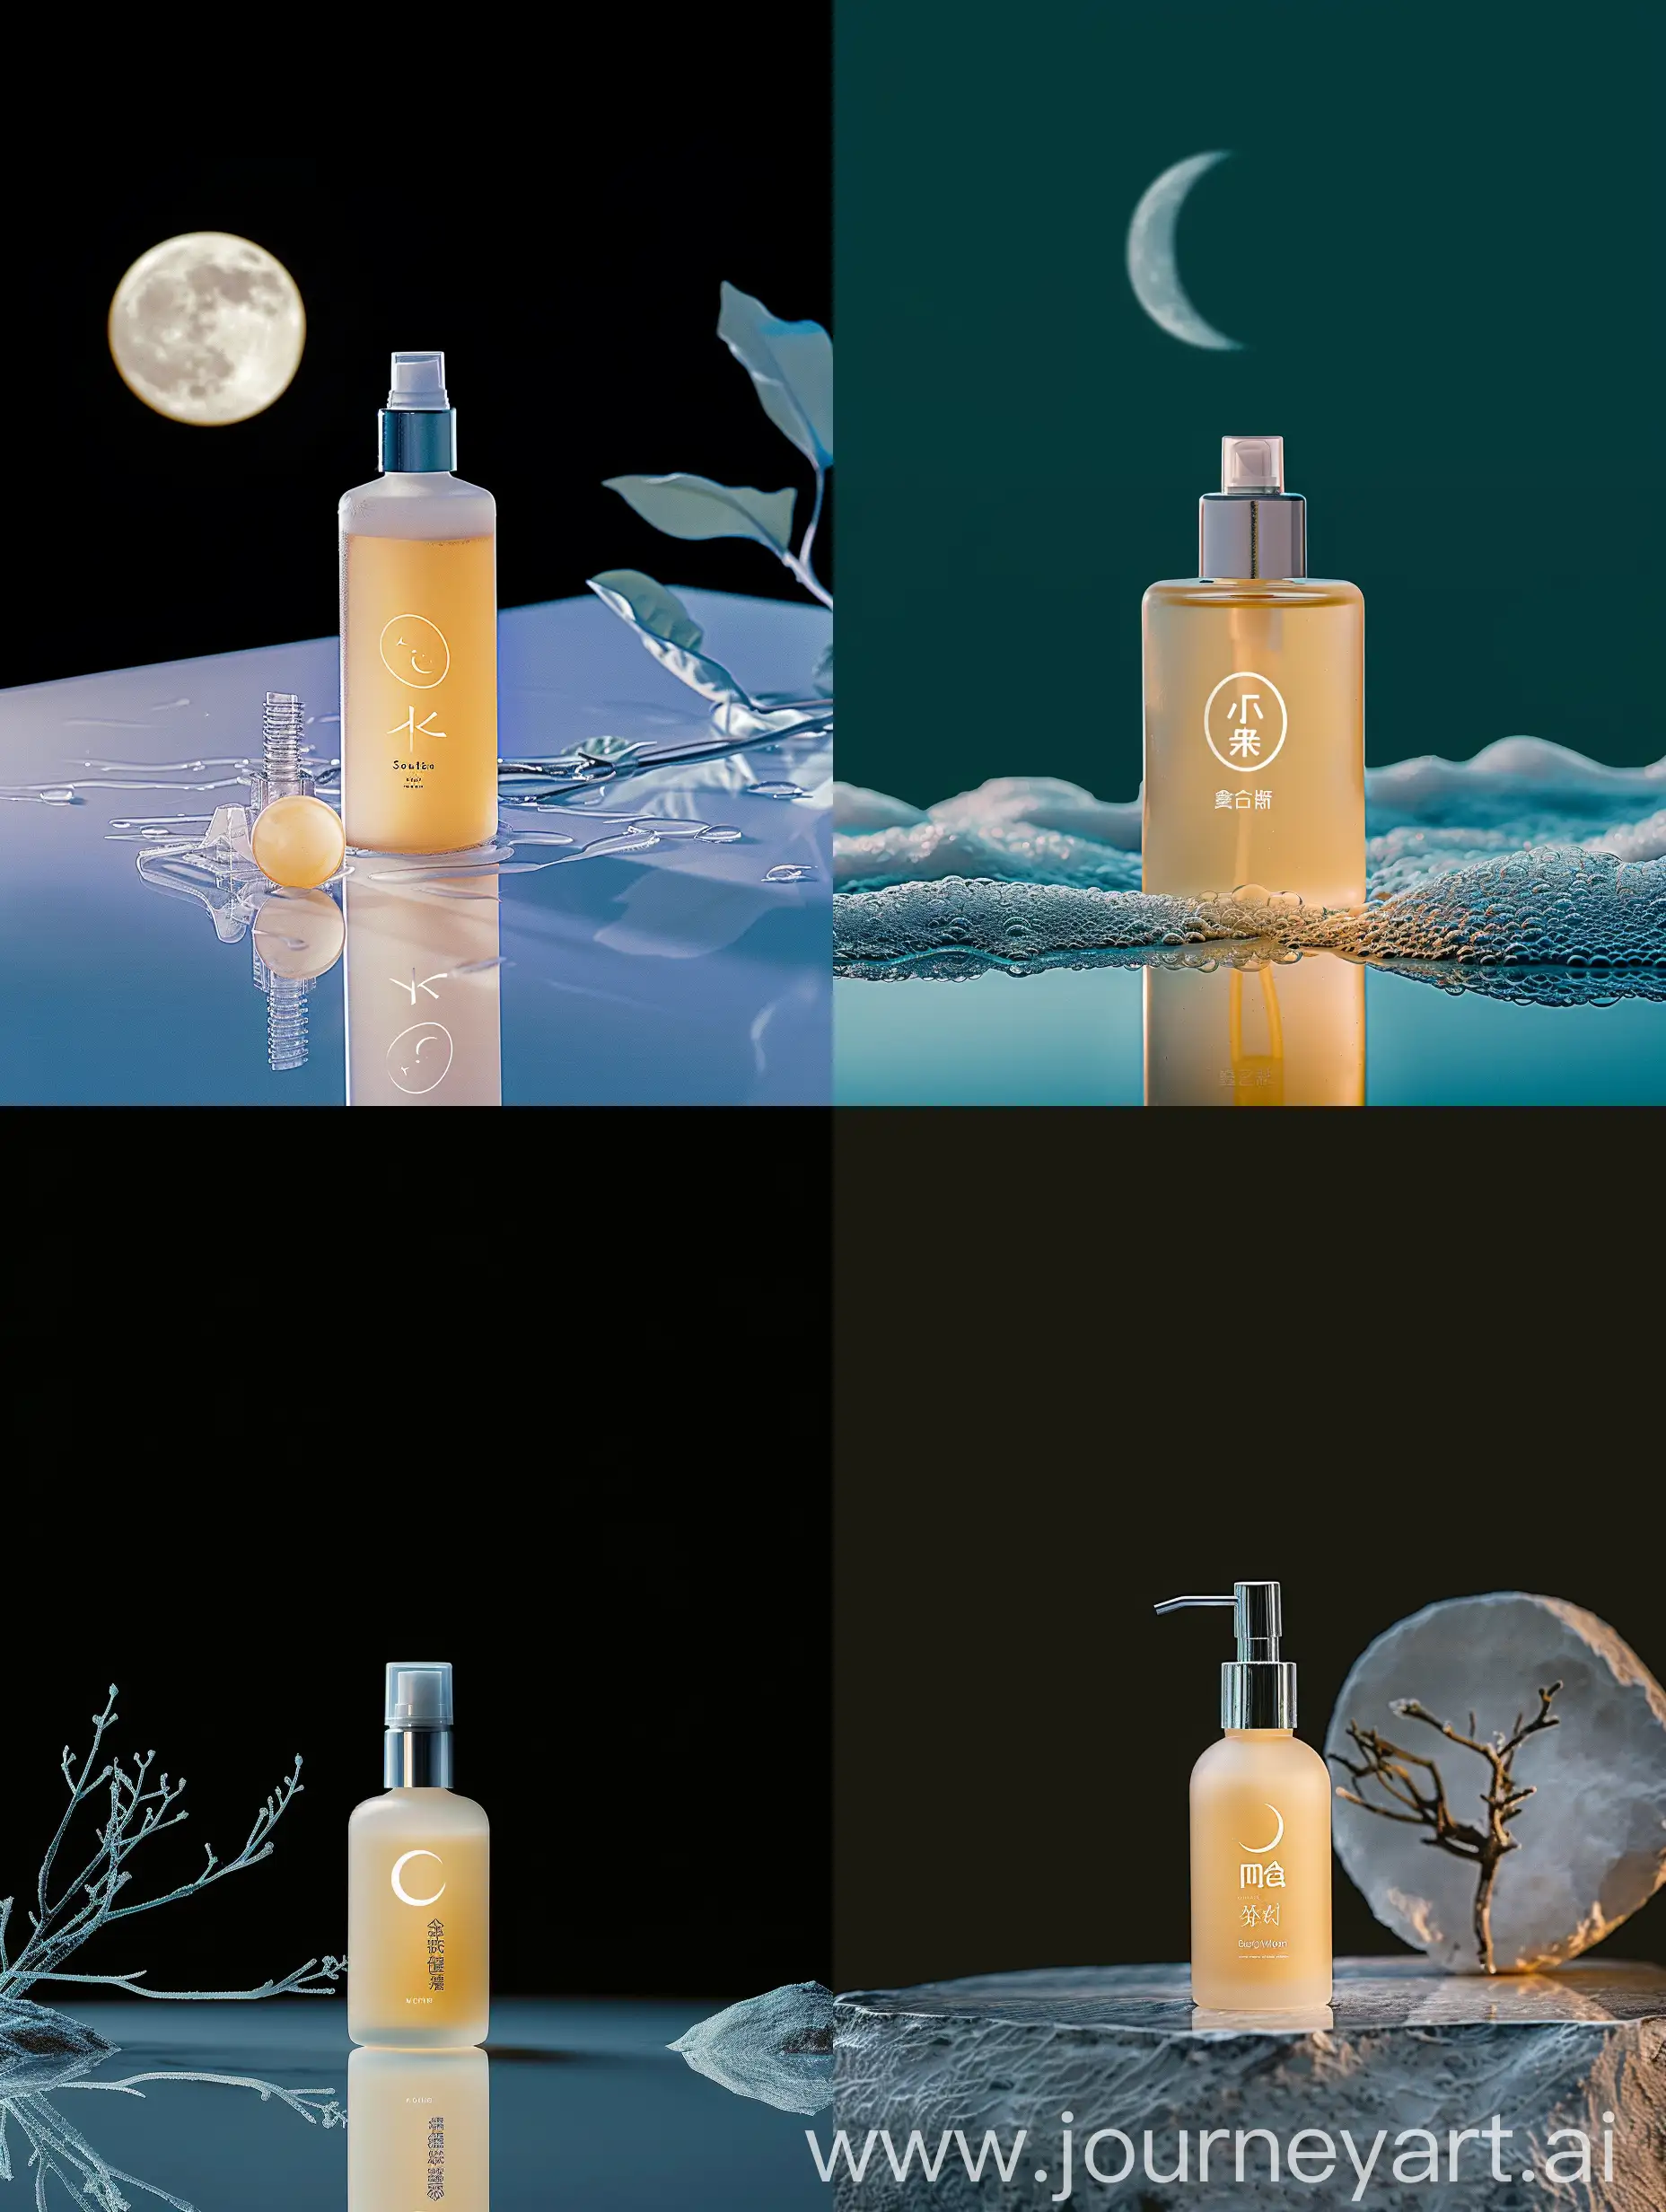 Moonlit-Skincare-Shampoo-Shoot-on-Clean-Surface